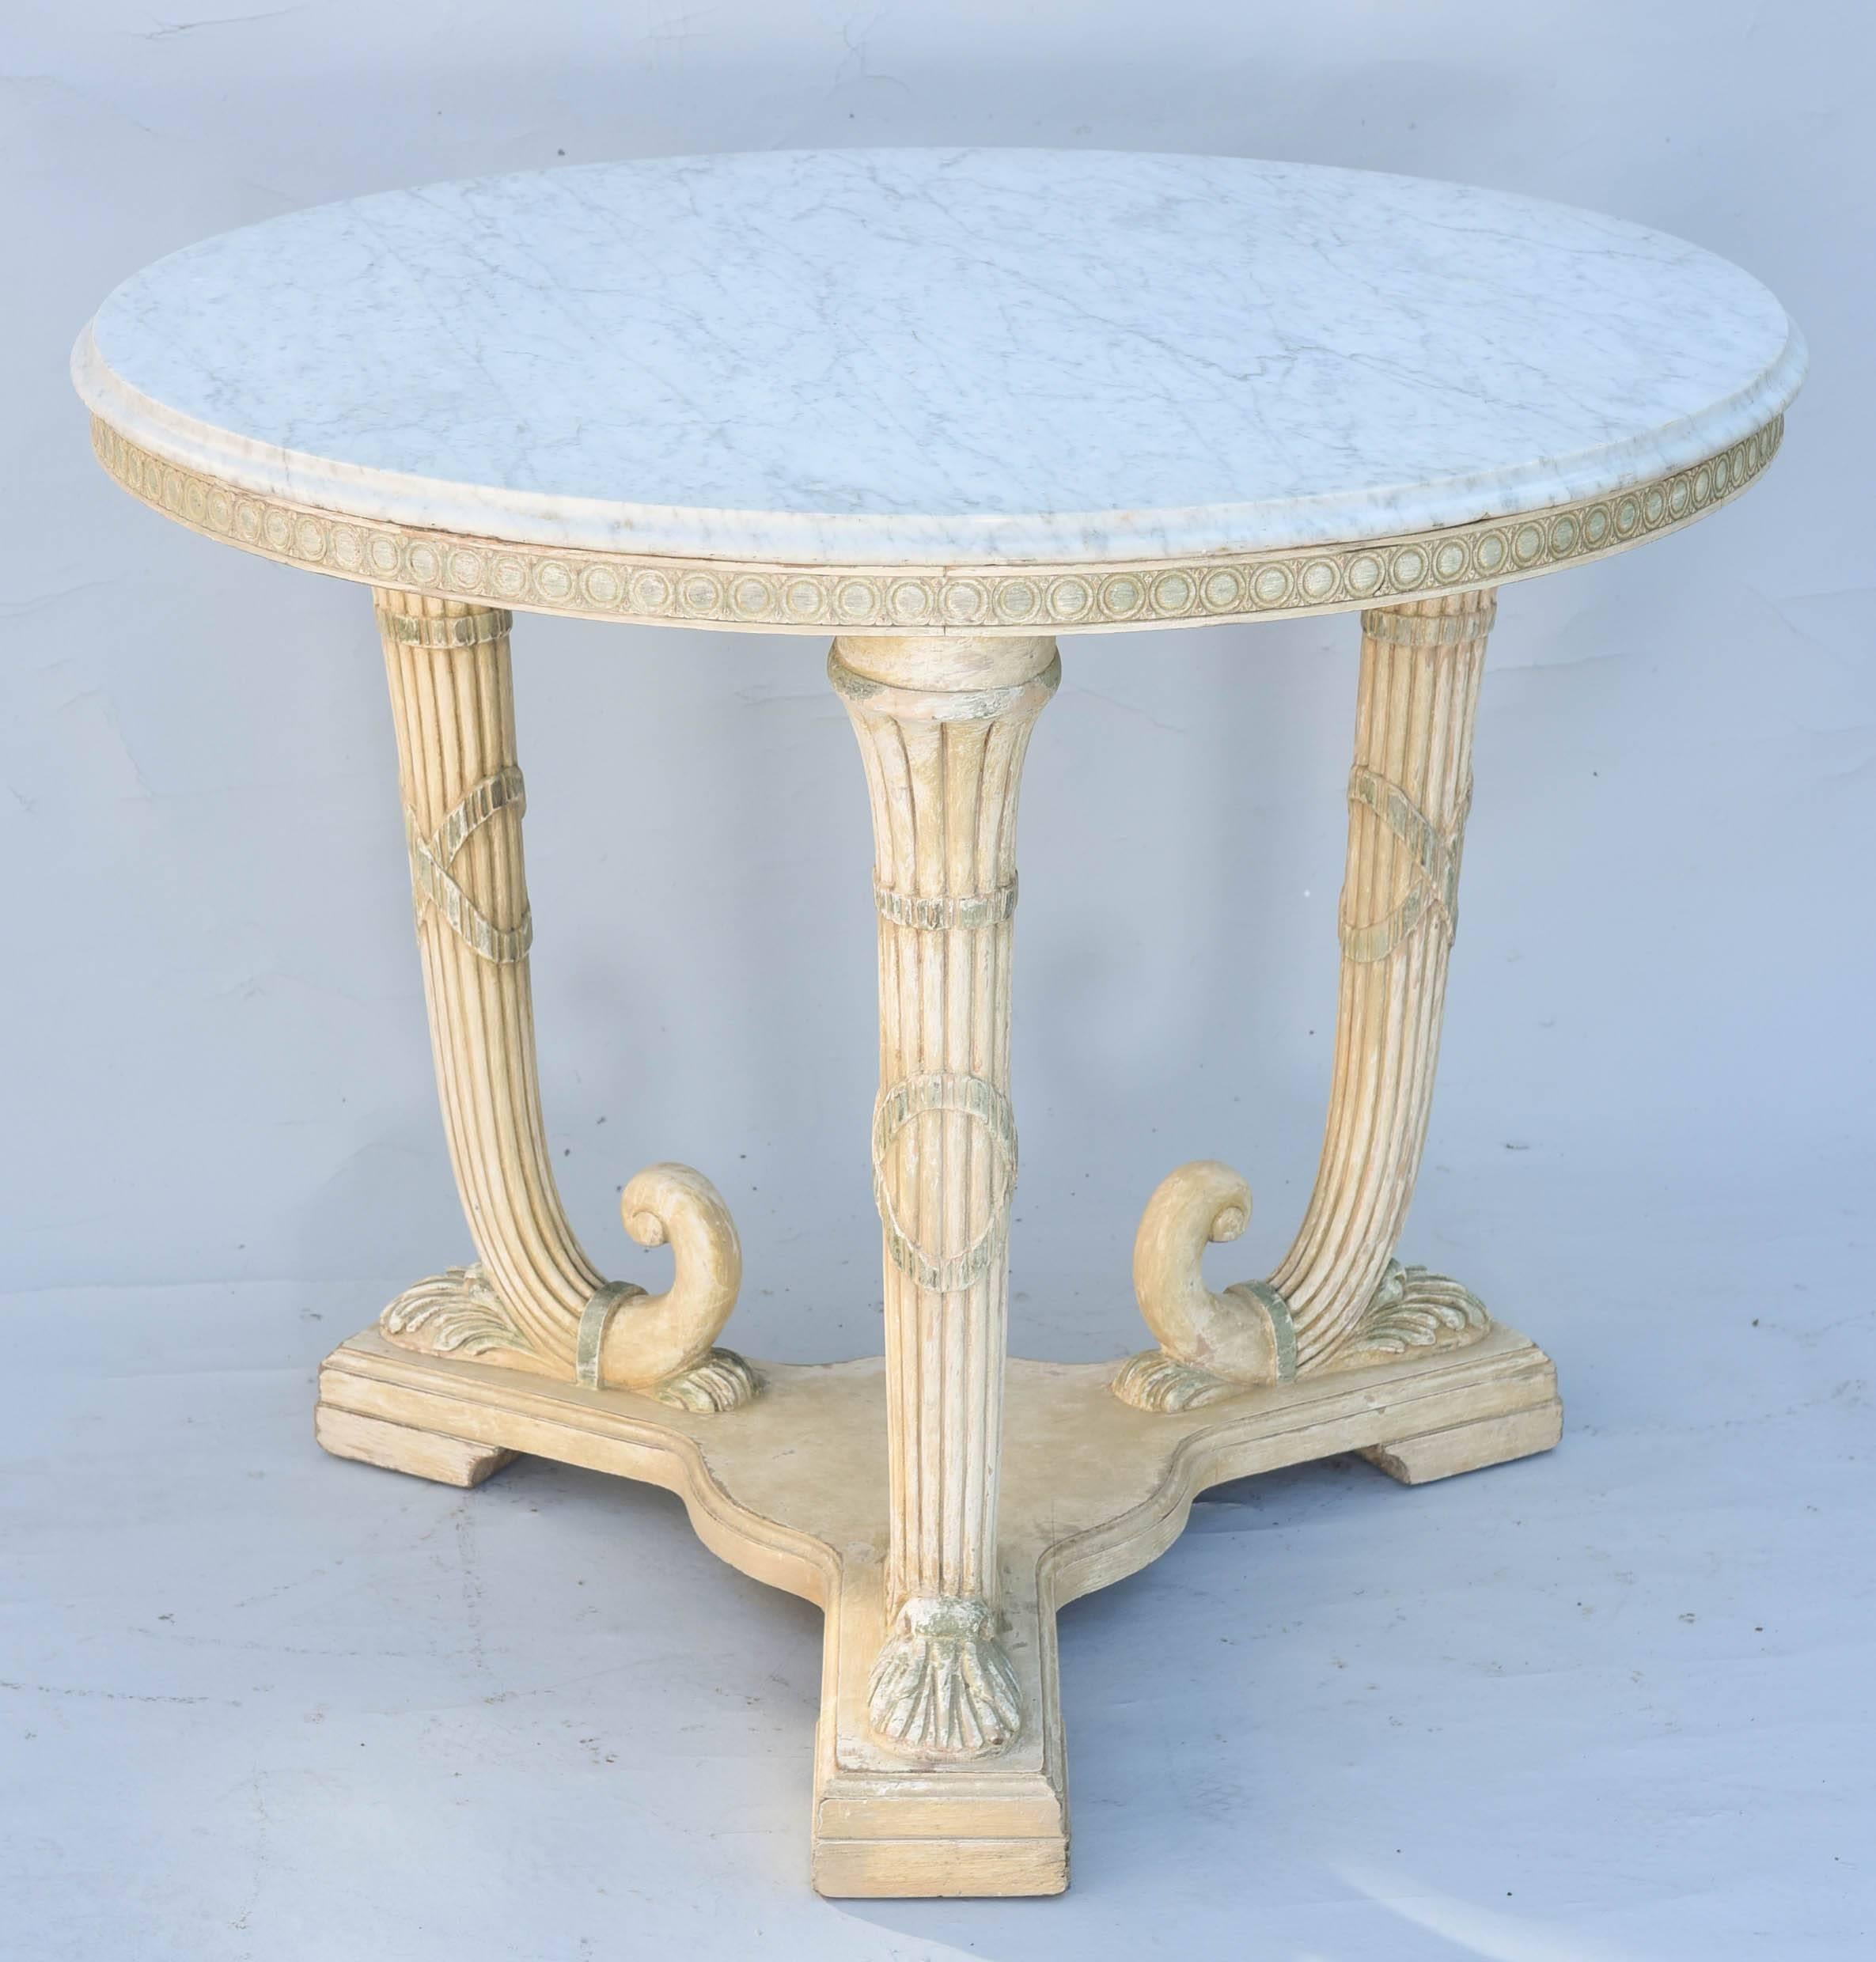 Wood Round Italian Center Table with Carrara Marble Top on Painted Base